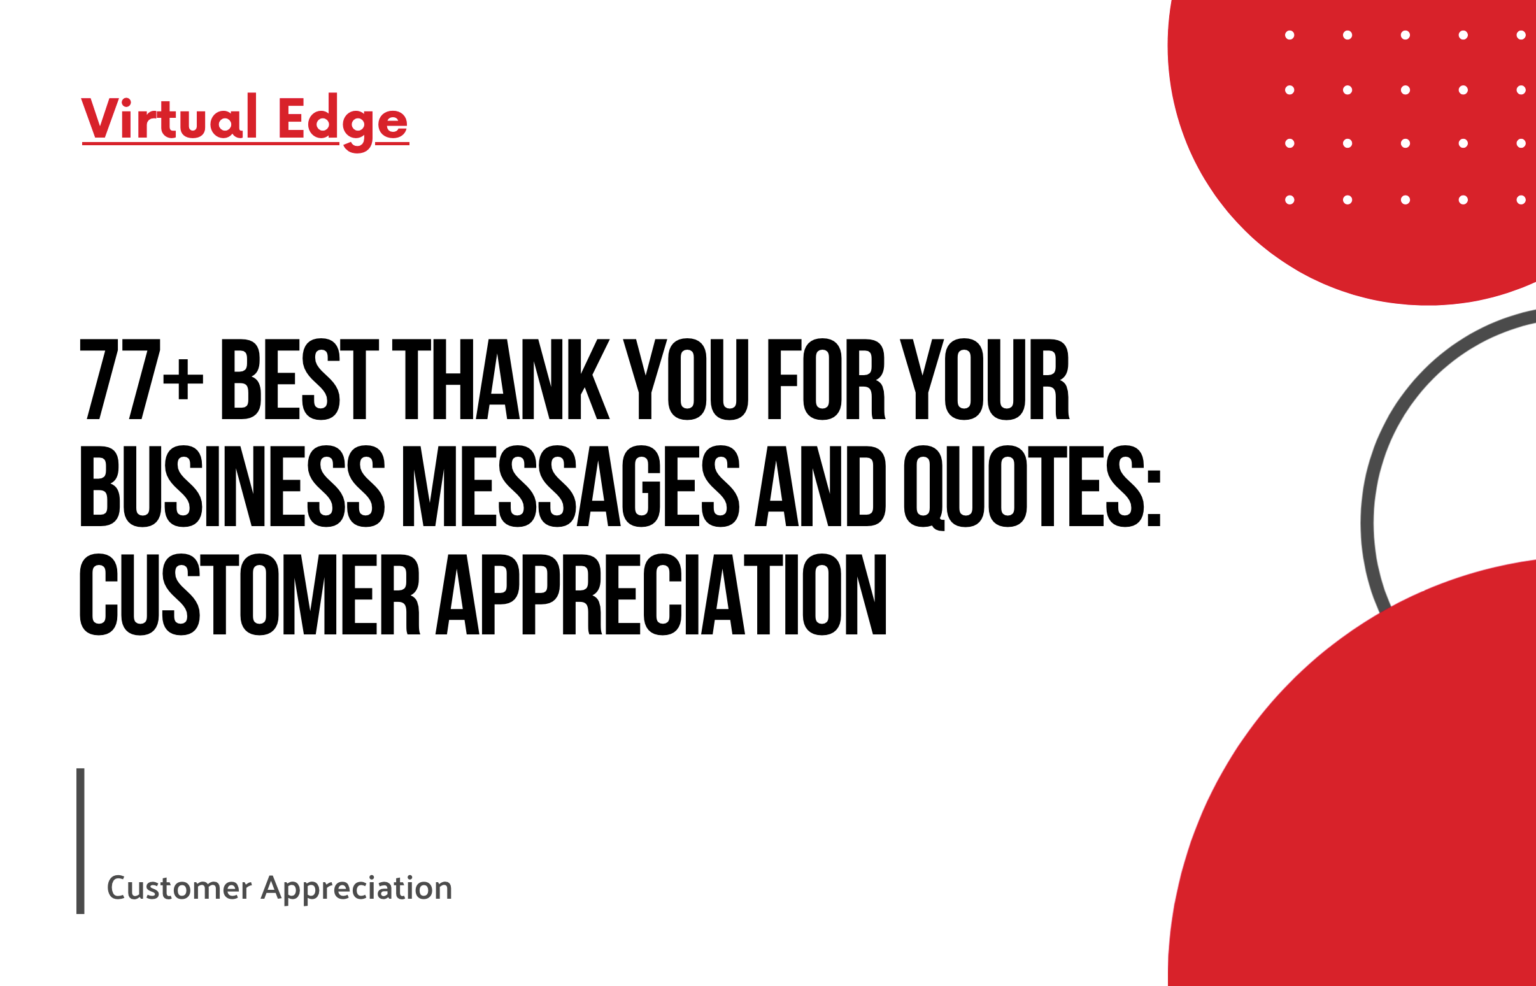 20 Best Thank You Messages And Quotes To Show Customer Appreciation